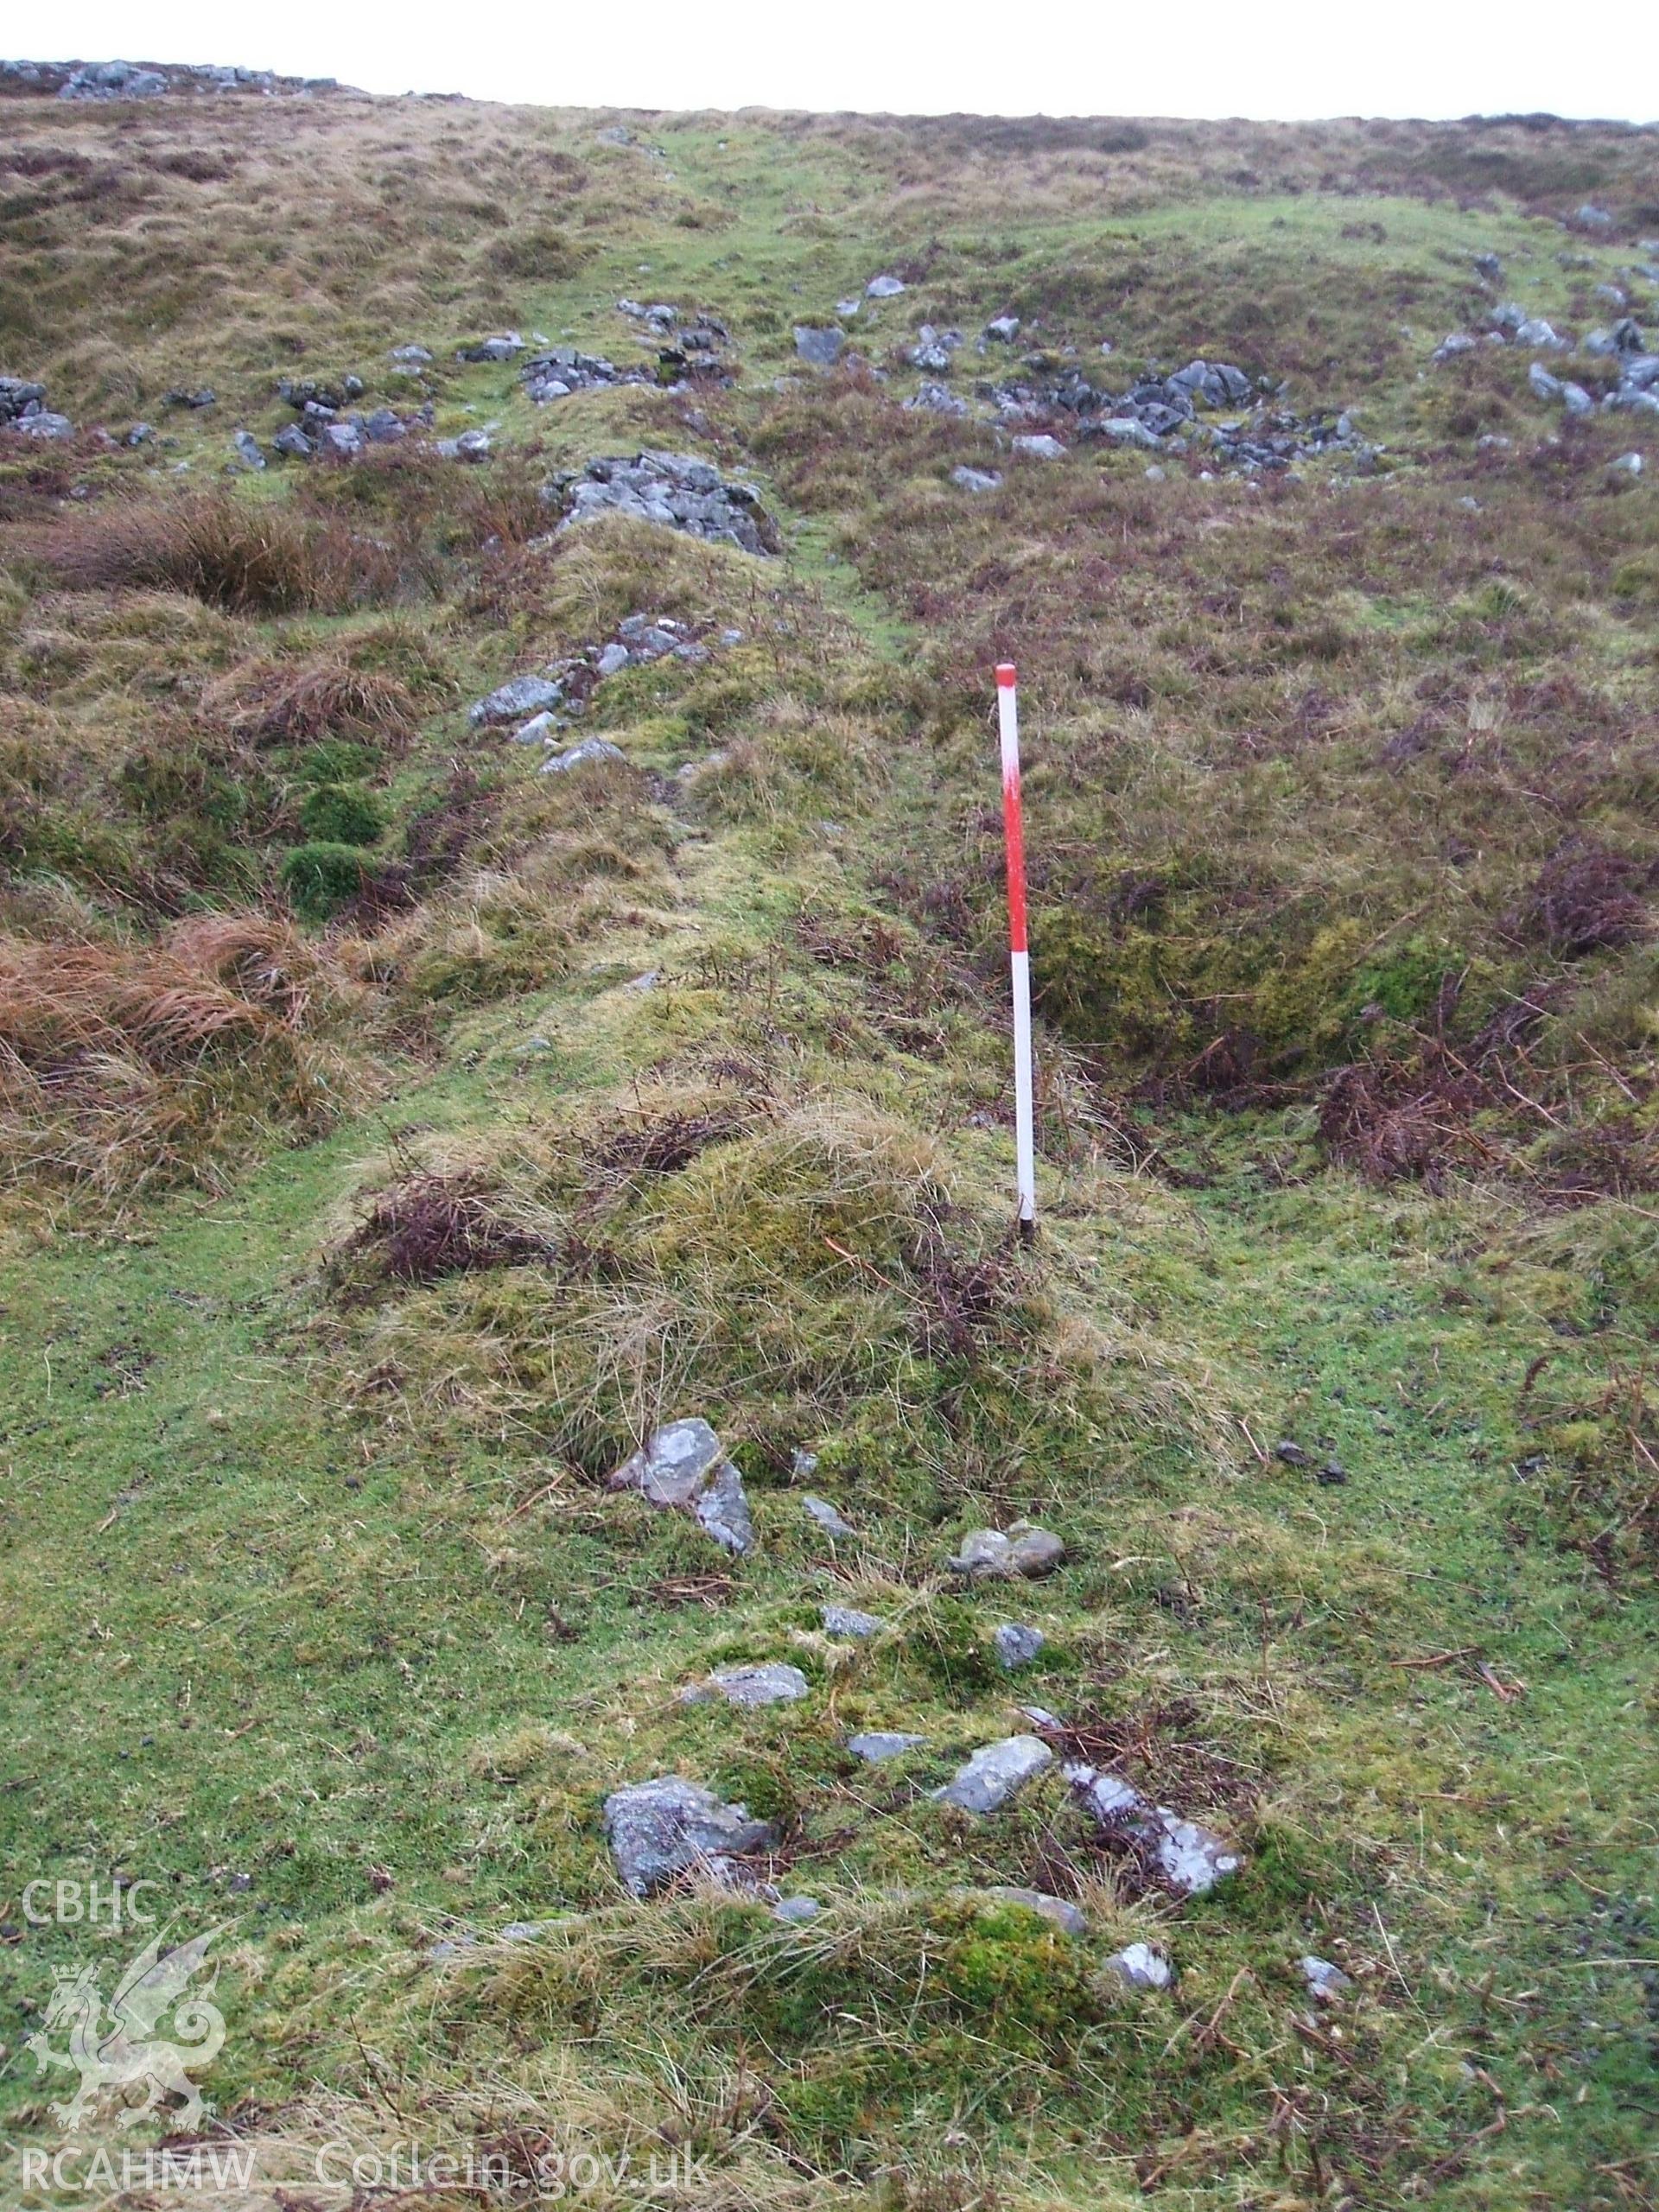 Digital colour photograph of a boundary at Mynydd Llangynidr east taken on 13/01/2009 by B. Britton during the Mynydd Llangynidr Upland Survey undertaken by ArchaeoPhysica.